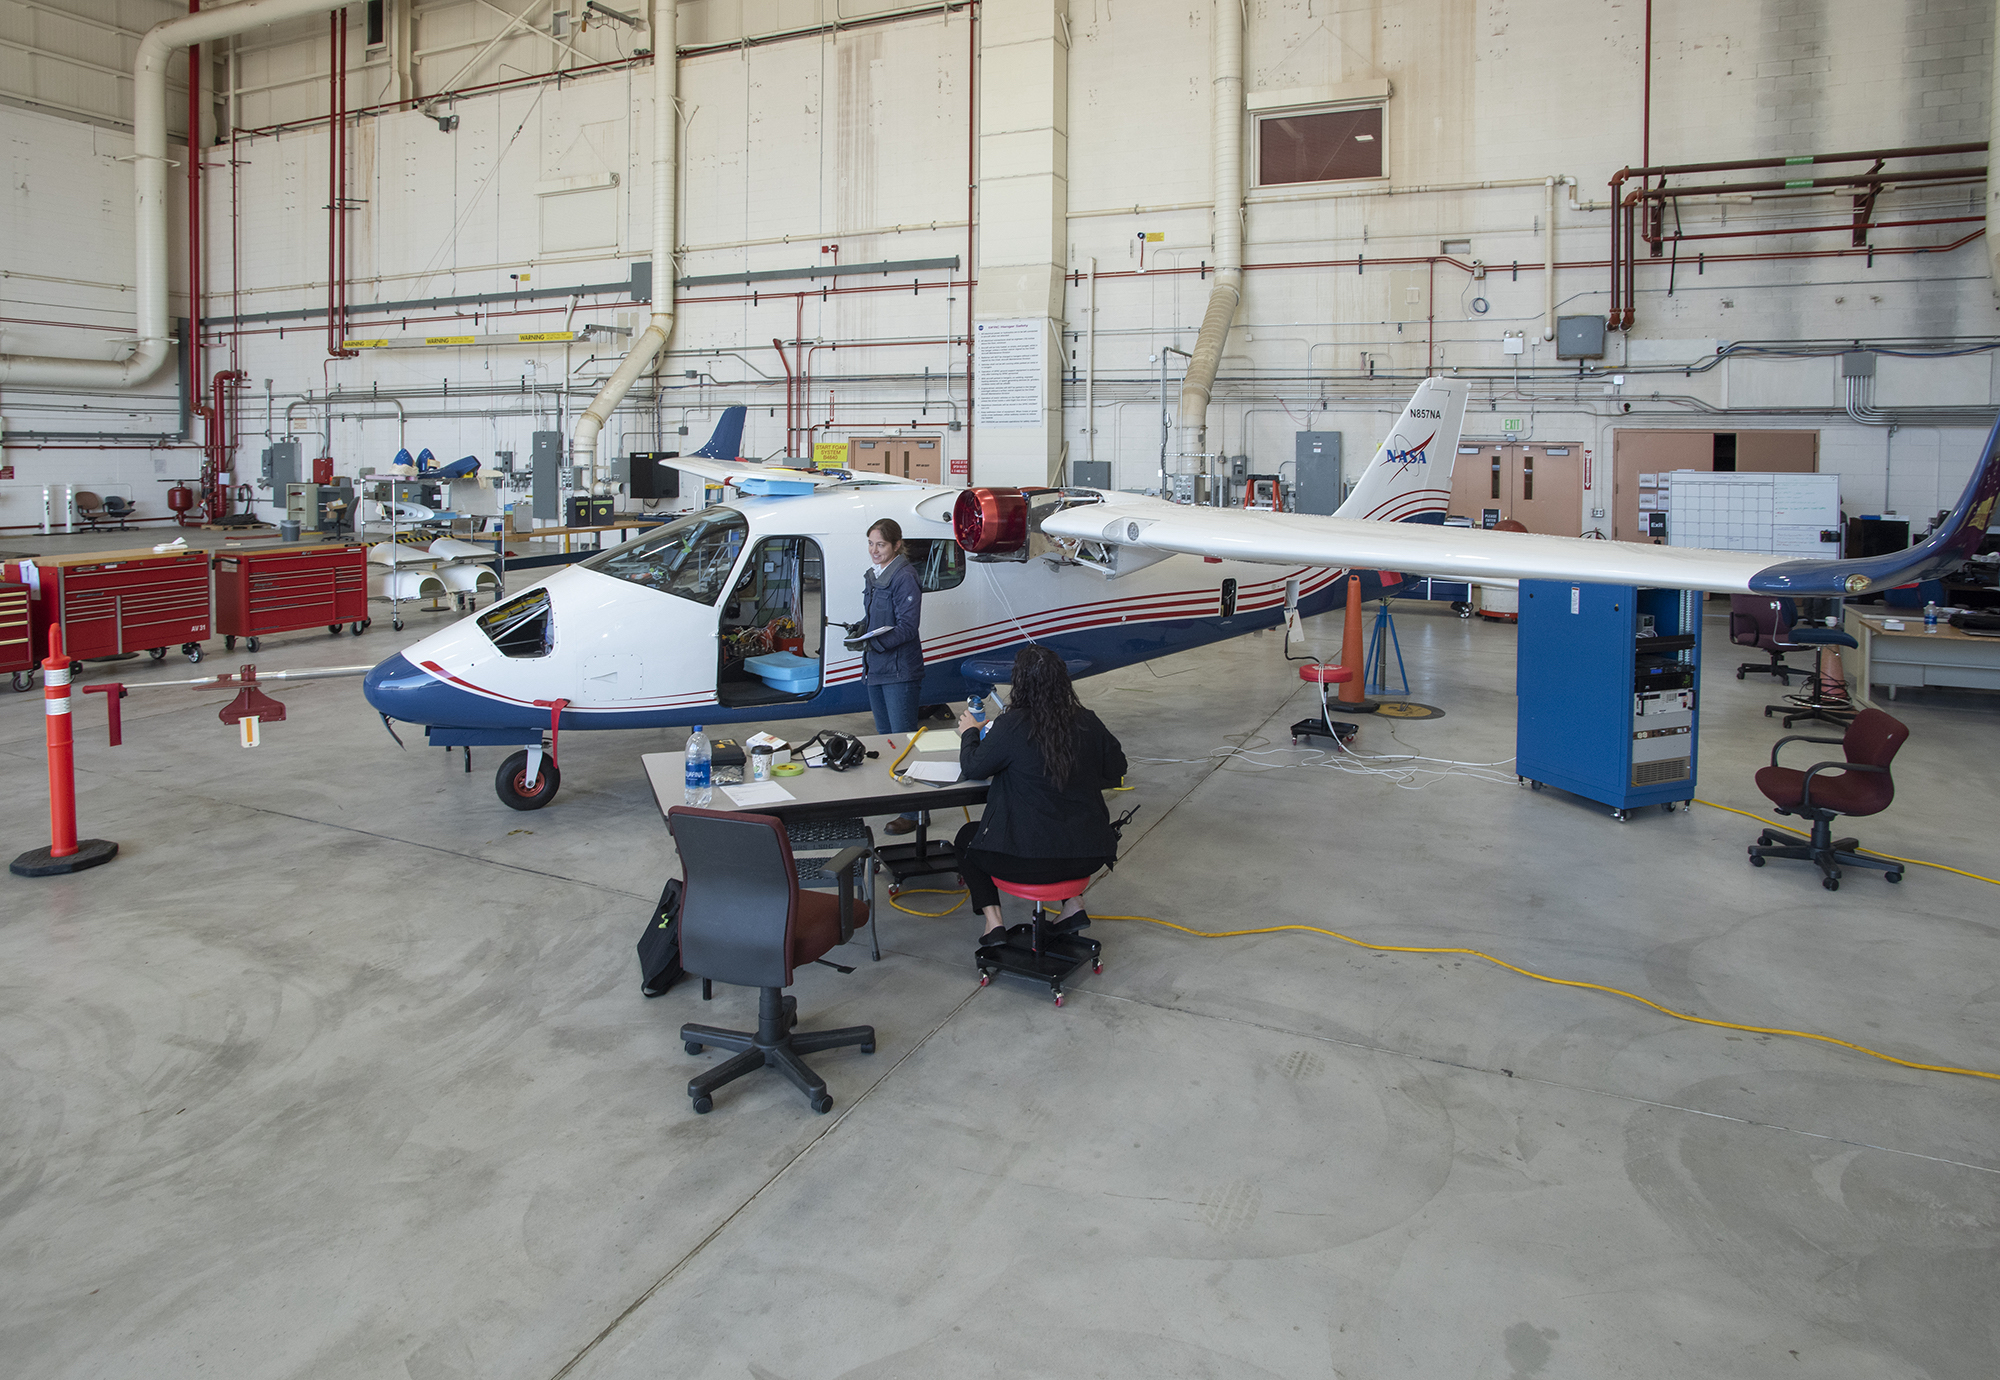 The X-57 aircraft during testing in 2020.